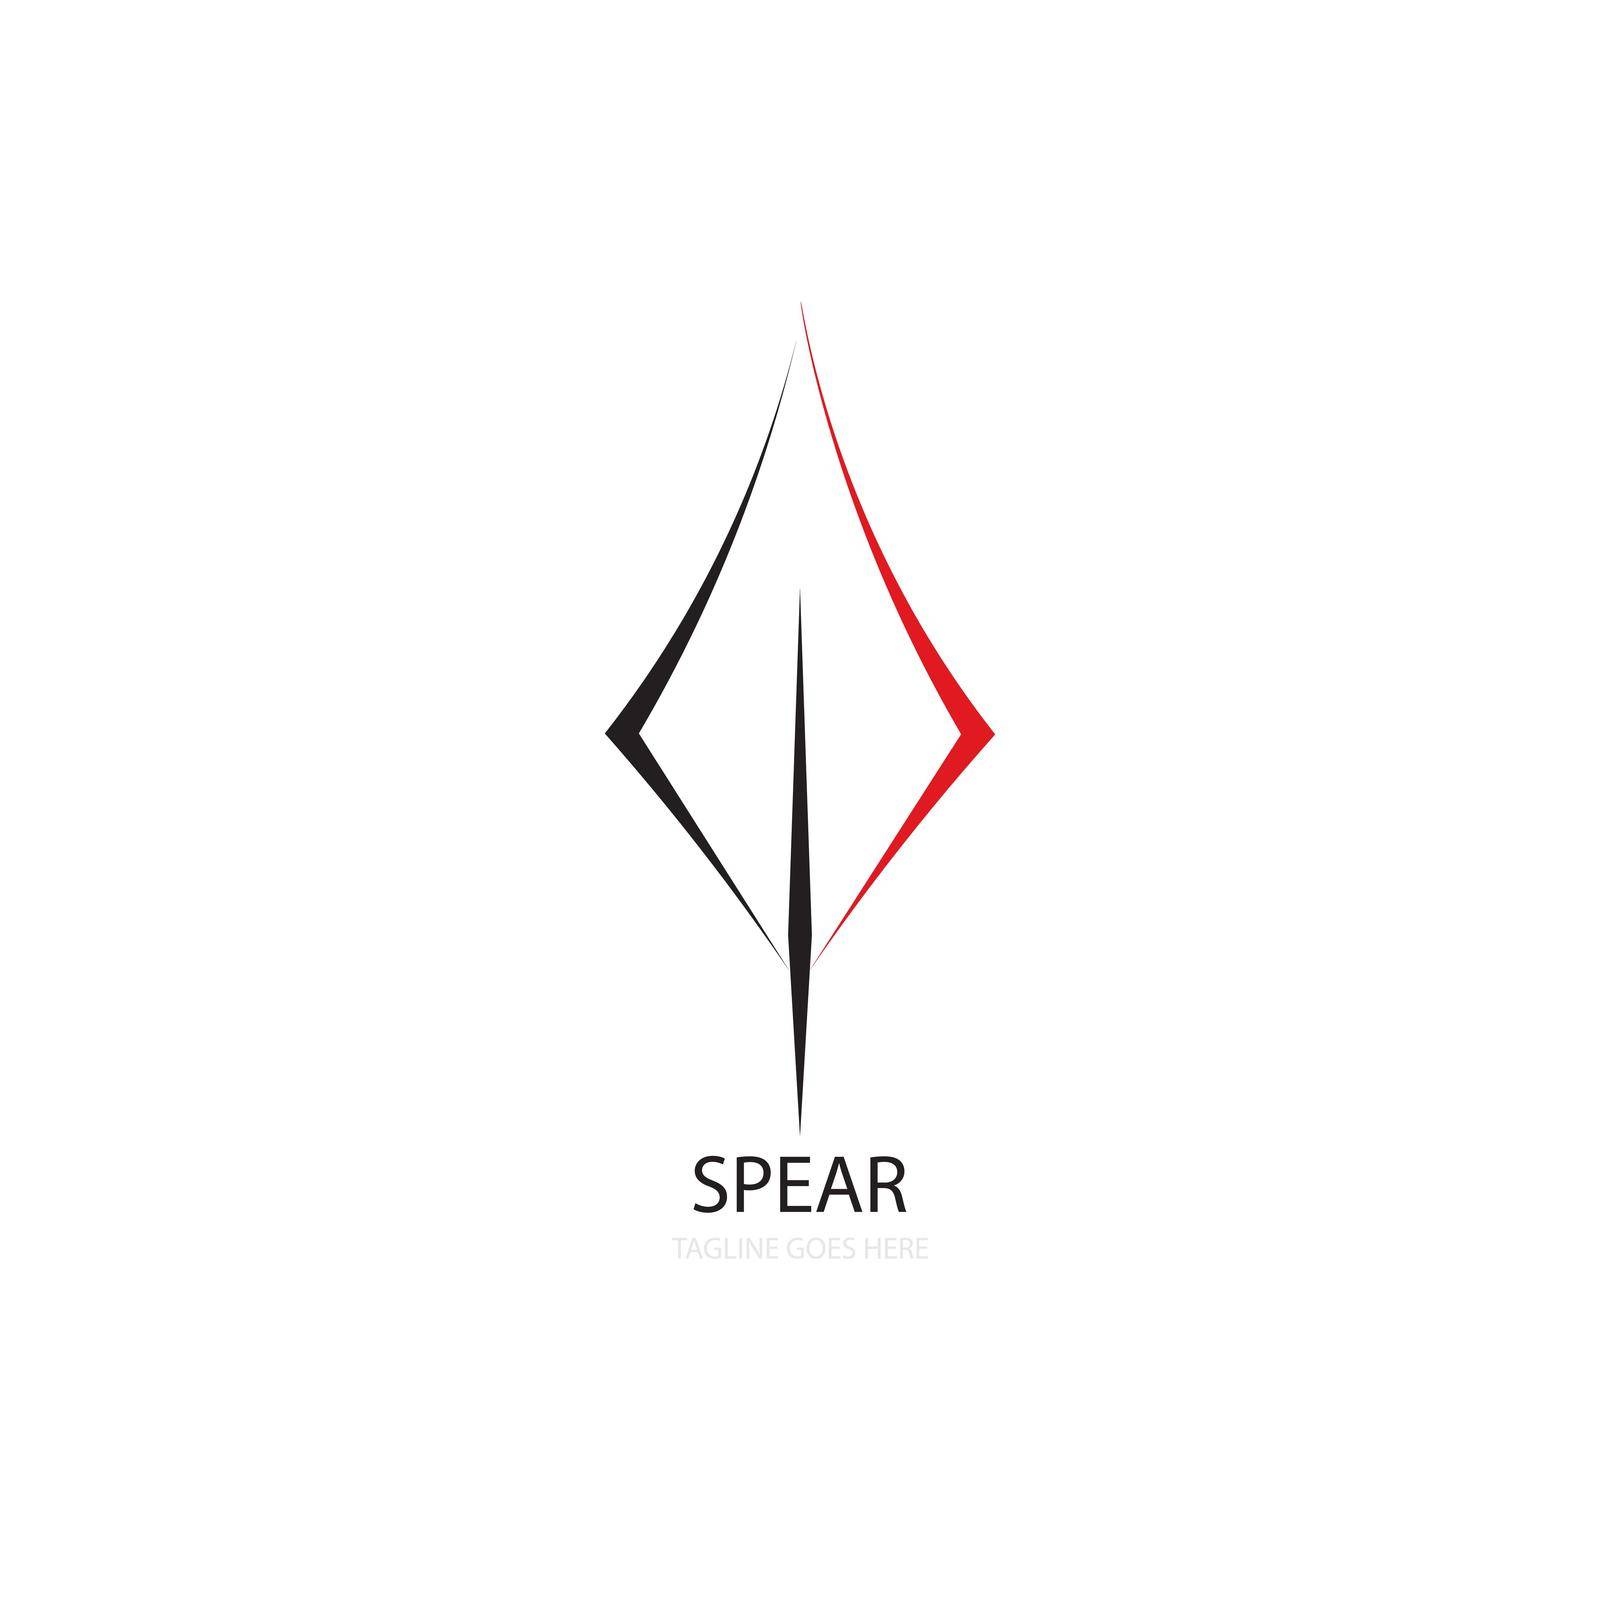 Spear icon logo free vector  by ABD03